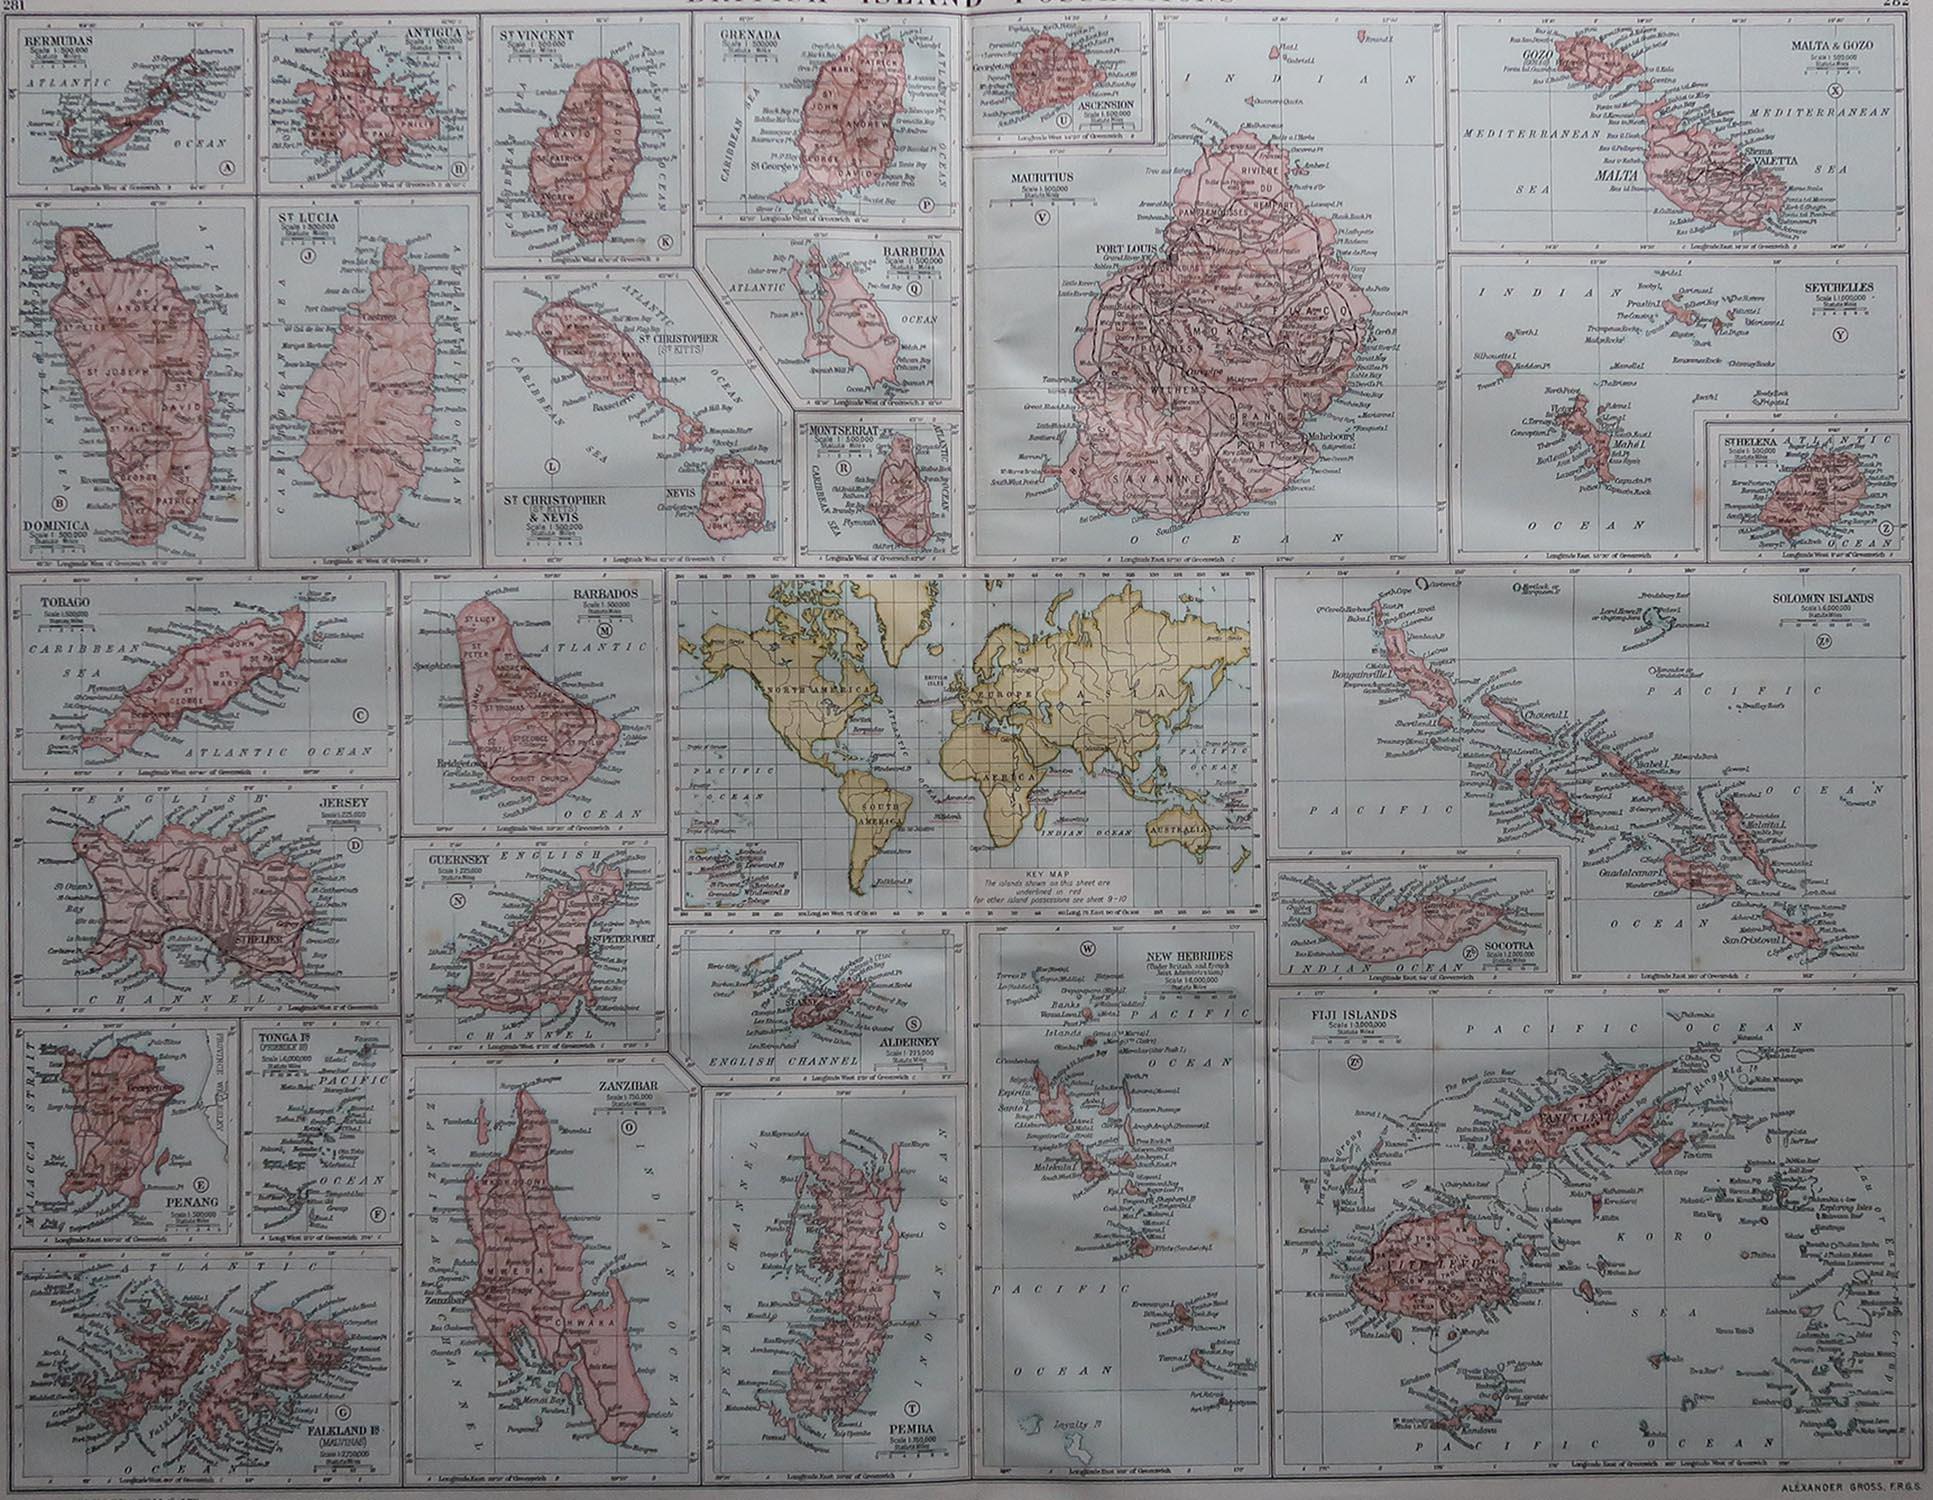 Great map of British Island Possessions

Original color. Good condition

Published by Alexander Gross

Unframed.








